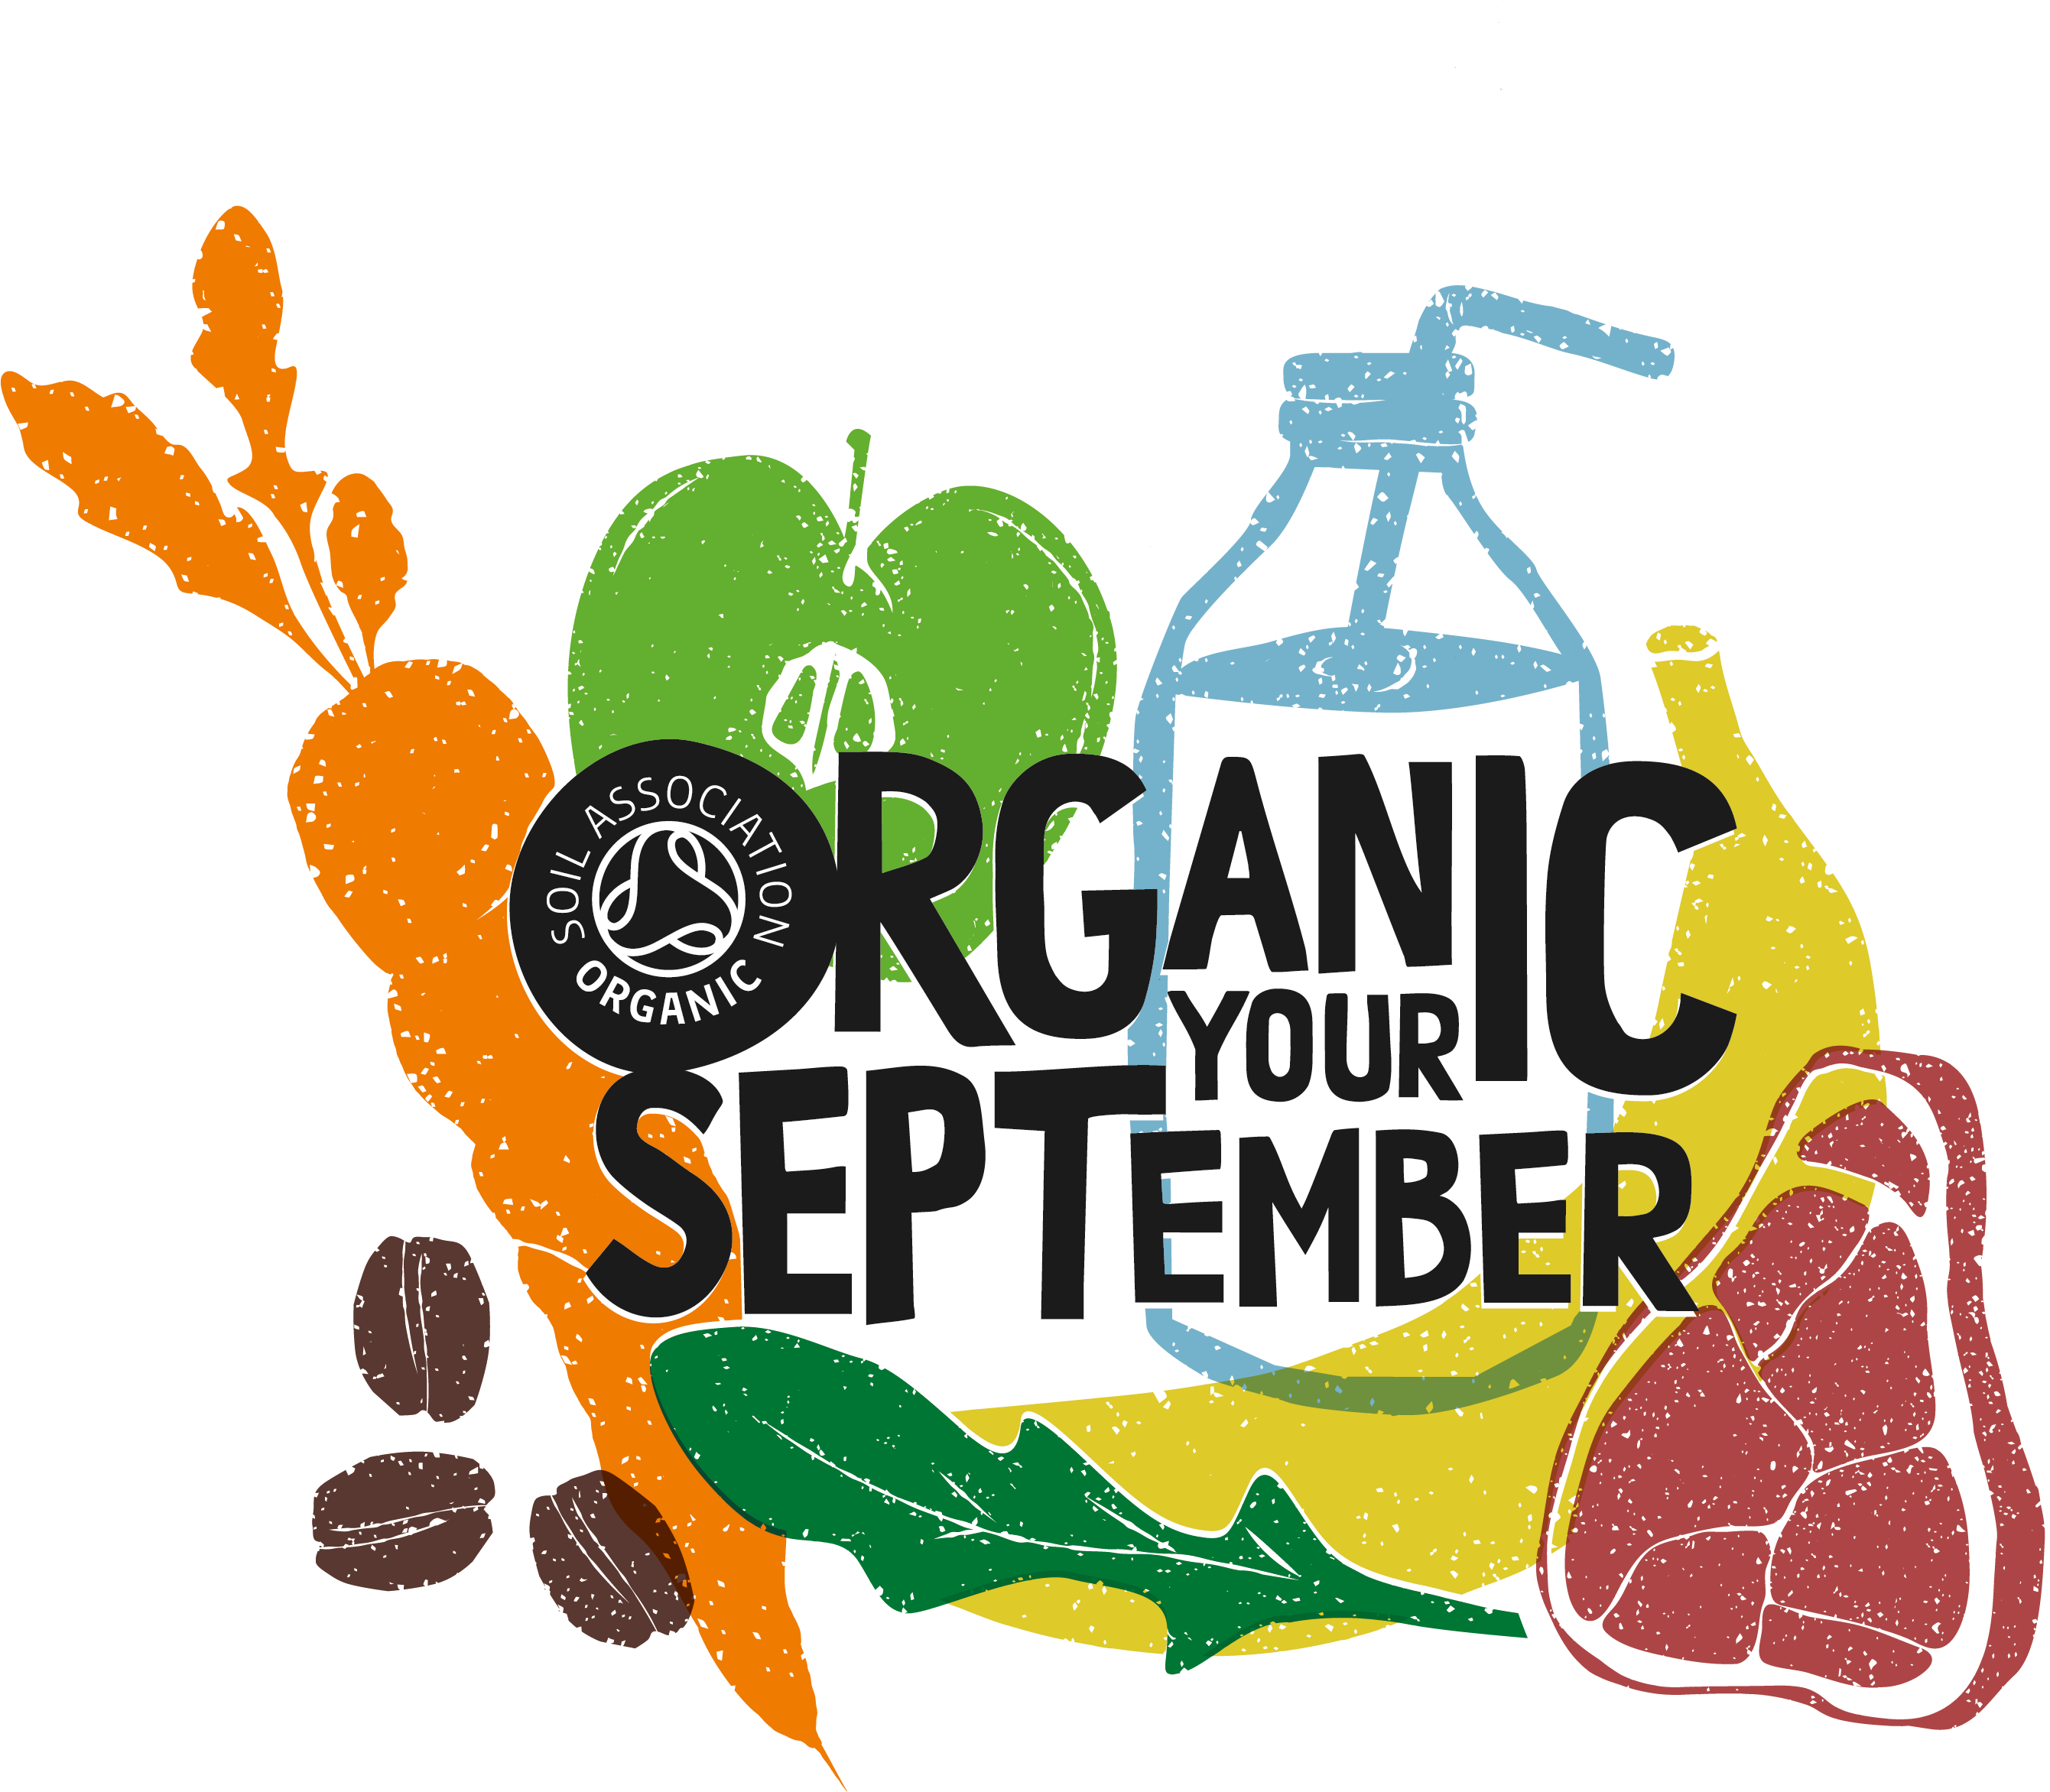 Our Mission Is To Supply Premium Quality Produce, Responsibly - Organic September 2018 (3162x2549)